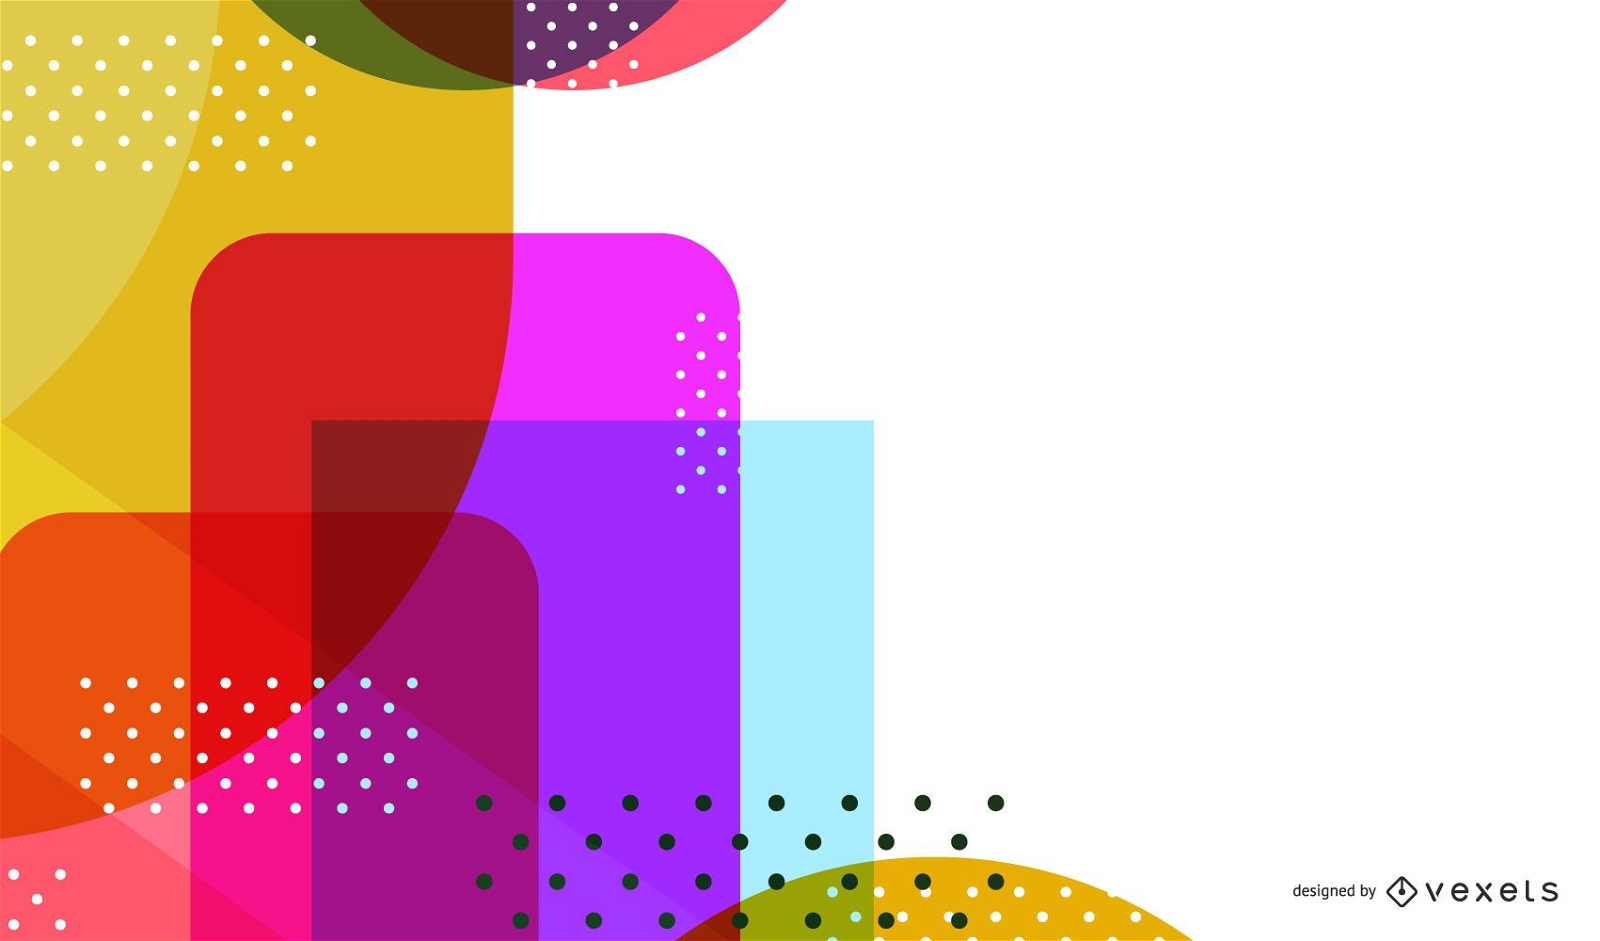 Bright colorful abstract shapes backdrop design